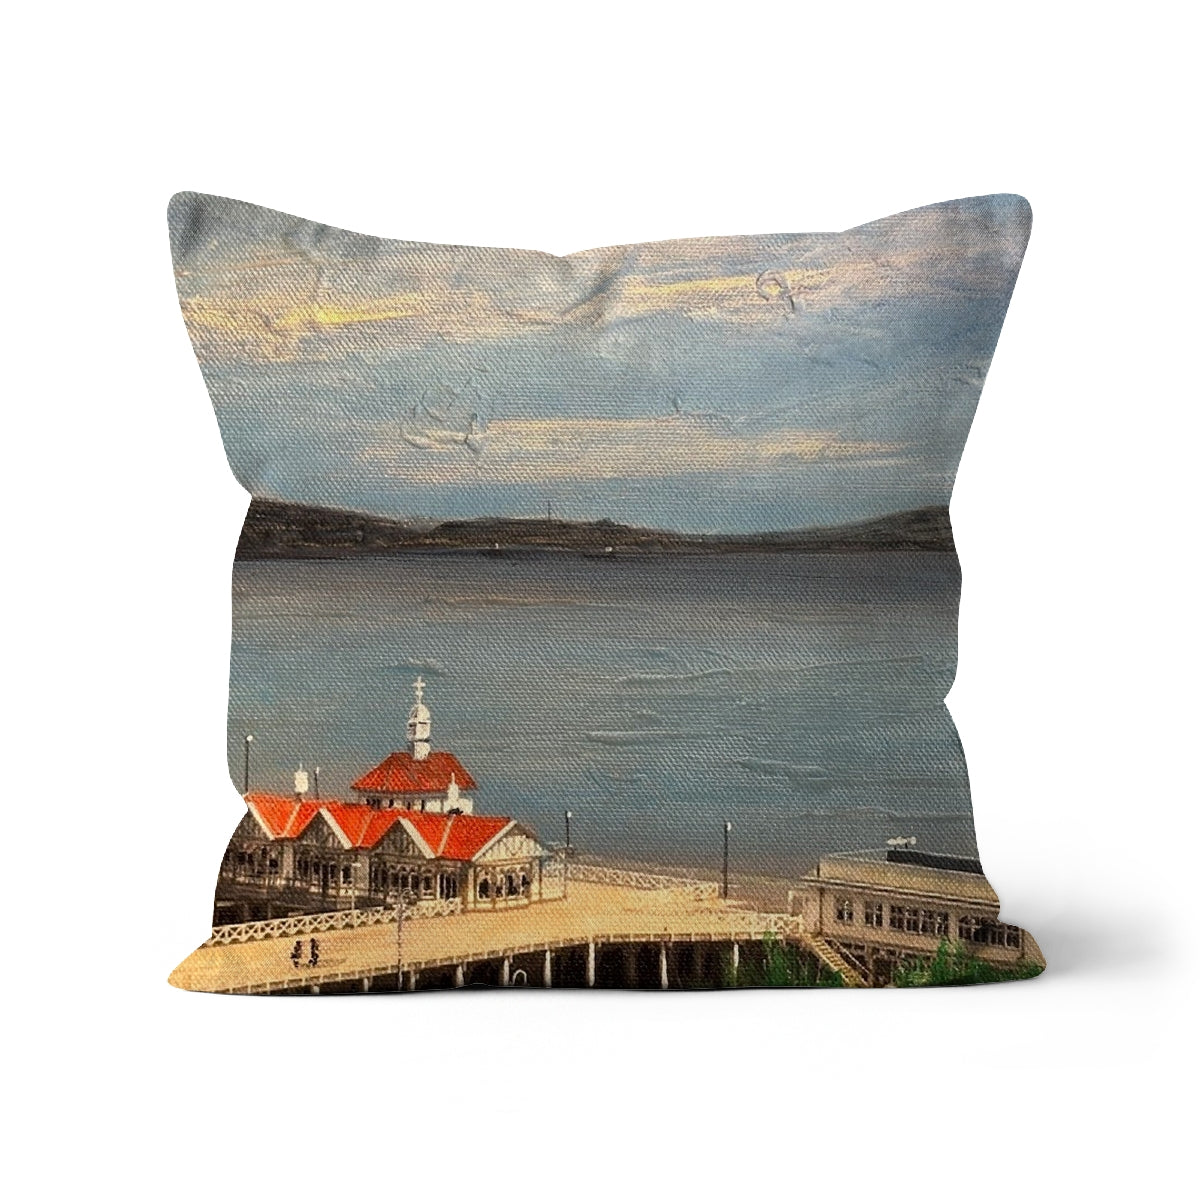 Looking From Dunoon Art Gifts Cushion-Cushions-River Clyde Art Gallery-Canvas-24"x24"-Paintings, Prints, Homeware, Art Gifts From Scotland By Scottish Artist Kevin Hunter